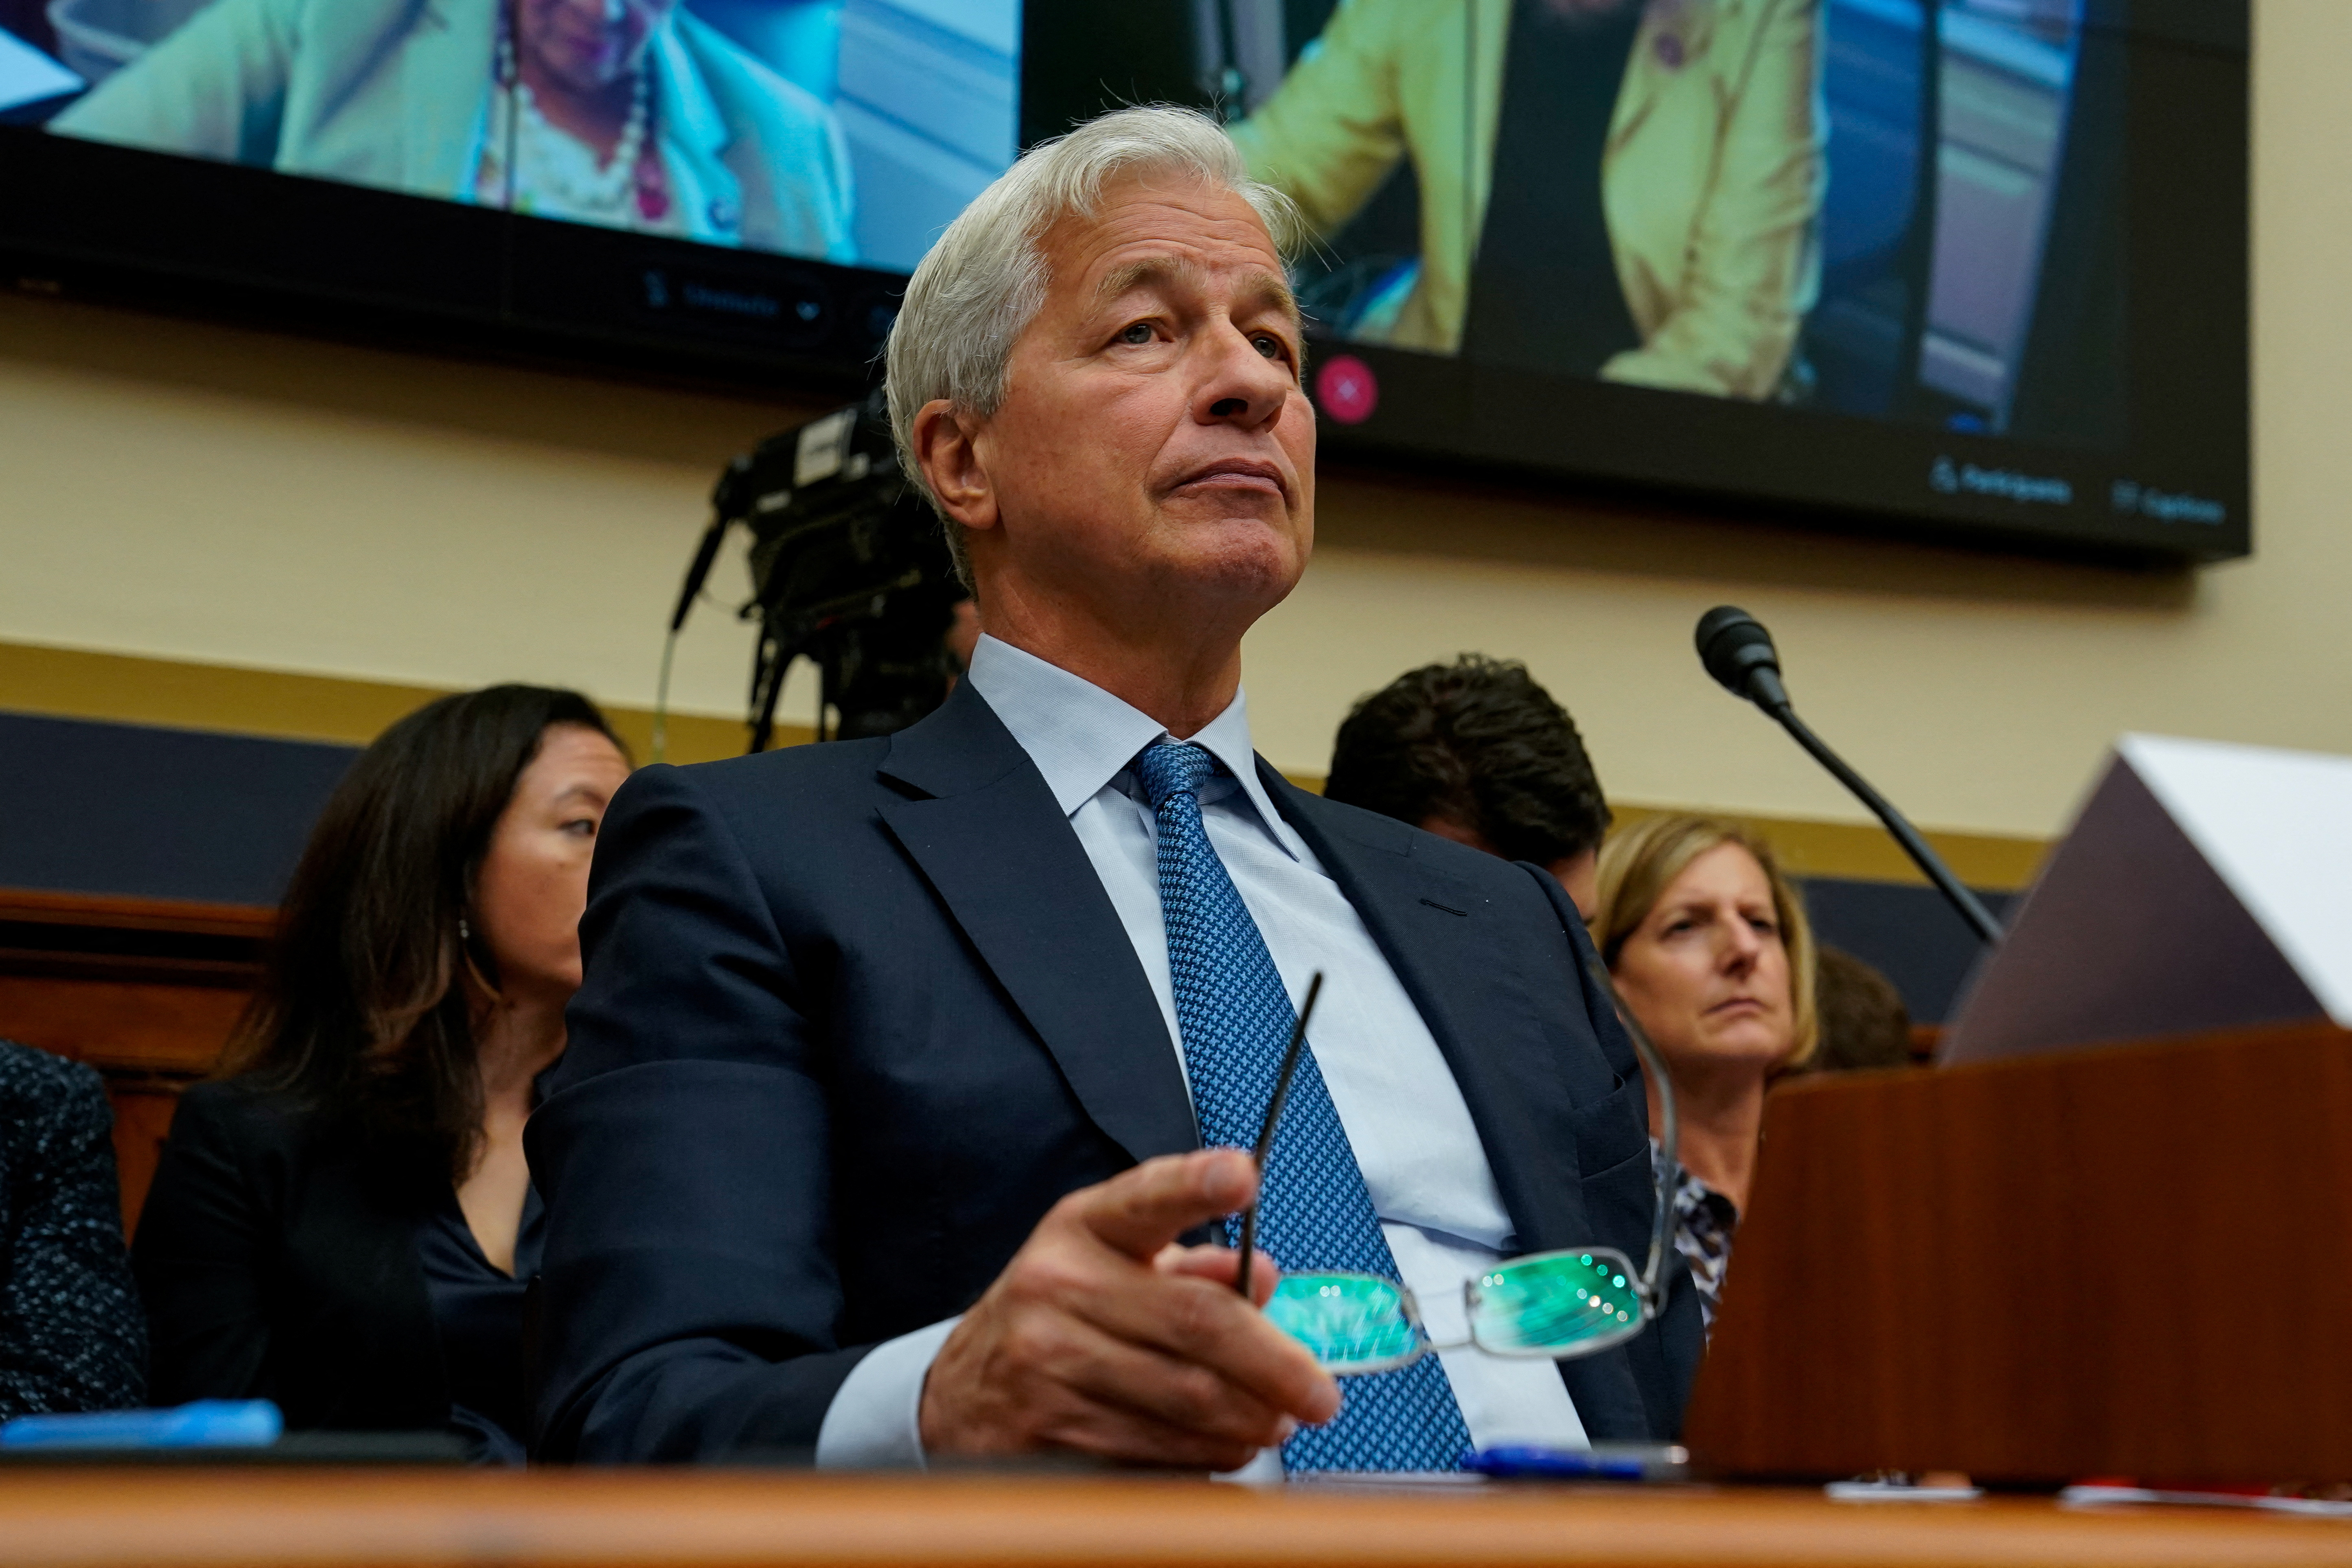 JPMorgan Chase Chairman Jamie Dimon at a US congressional committee hearing REUTERS/Elizabeth Frantz